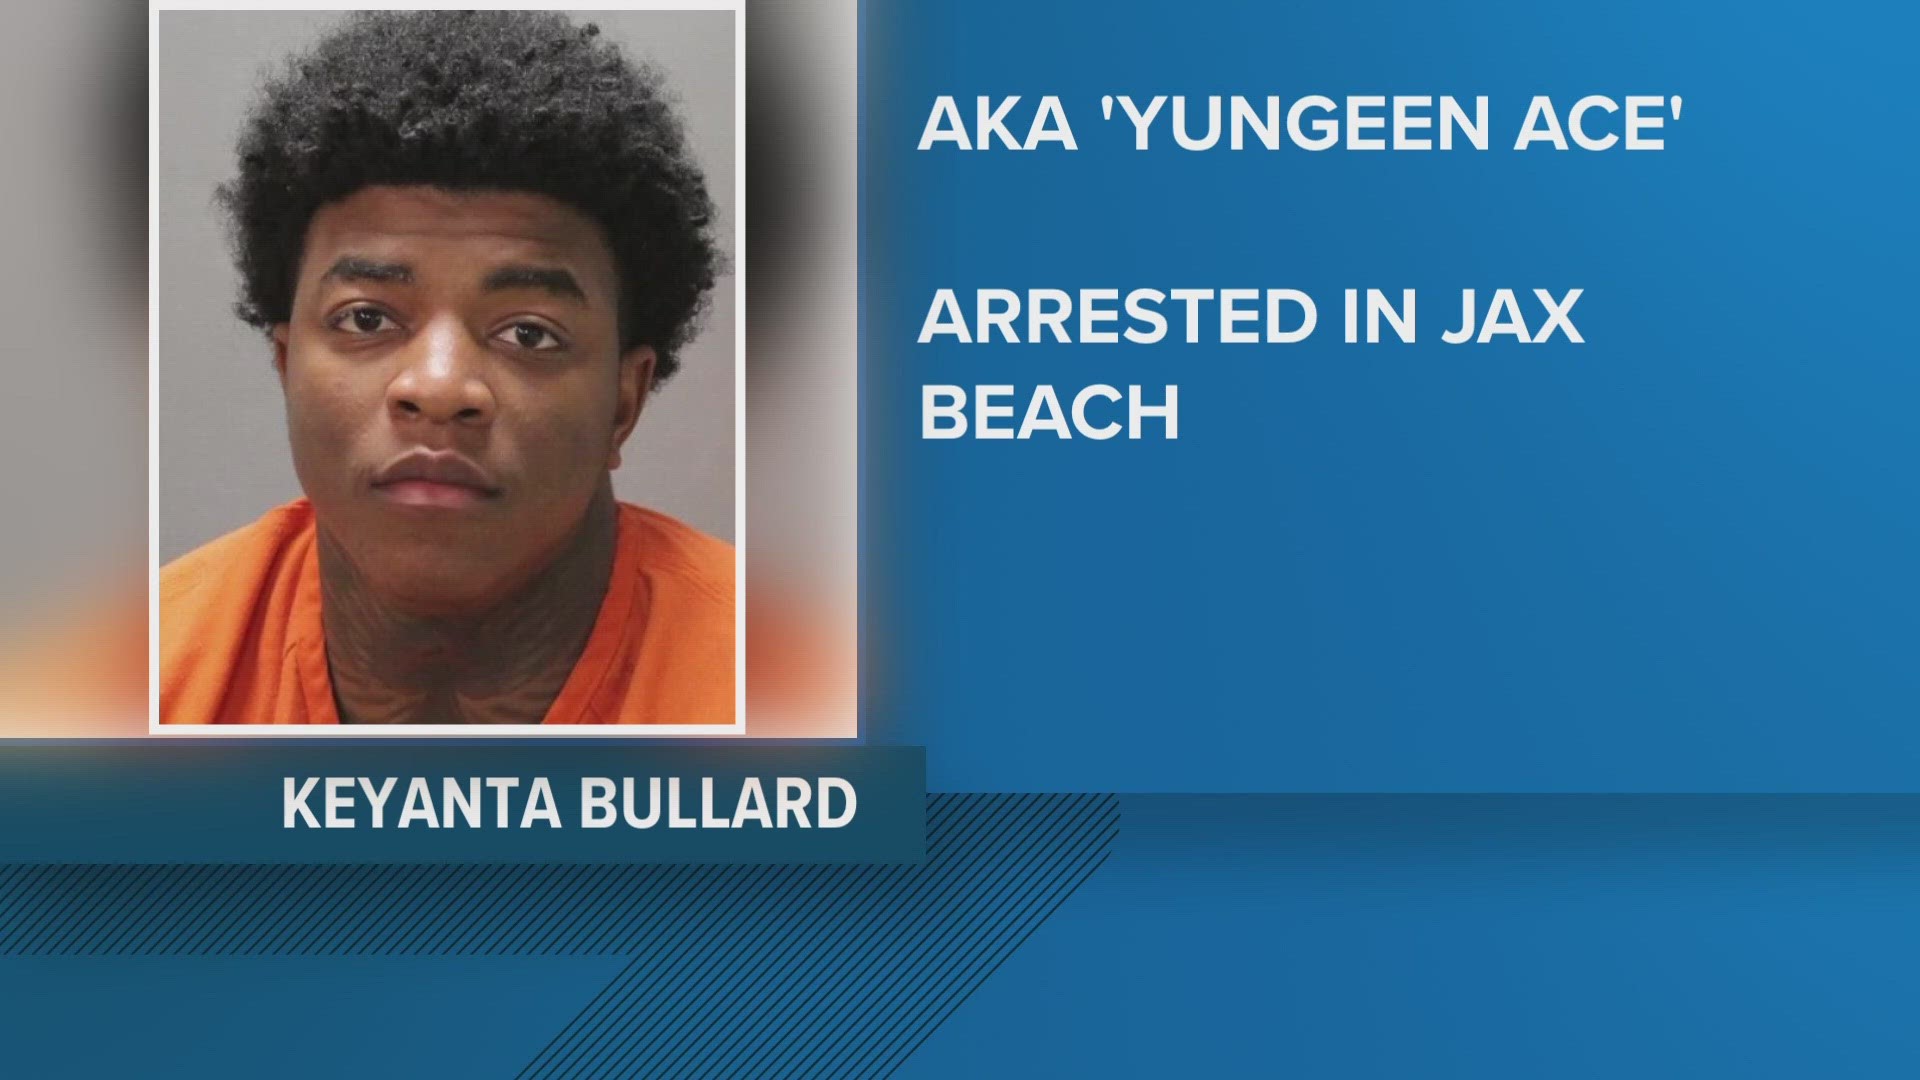 Yungeen Ace, whose real name is Keyanta Bullard, is a popular rapper born in Jacksonville. He was released Tuesday after posting bail.